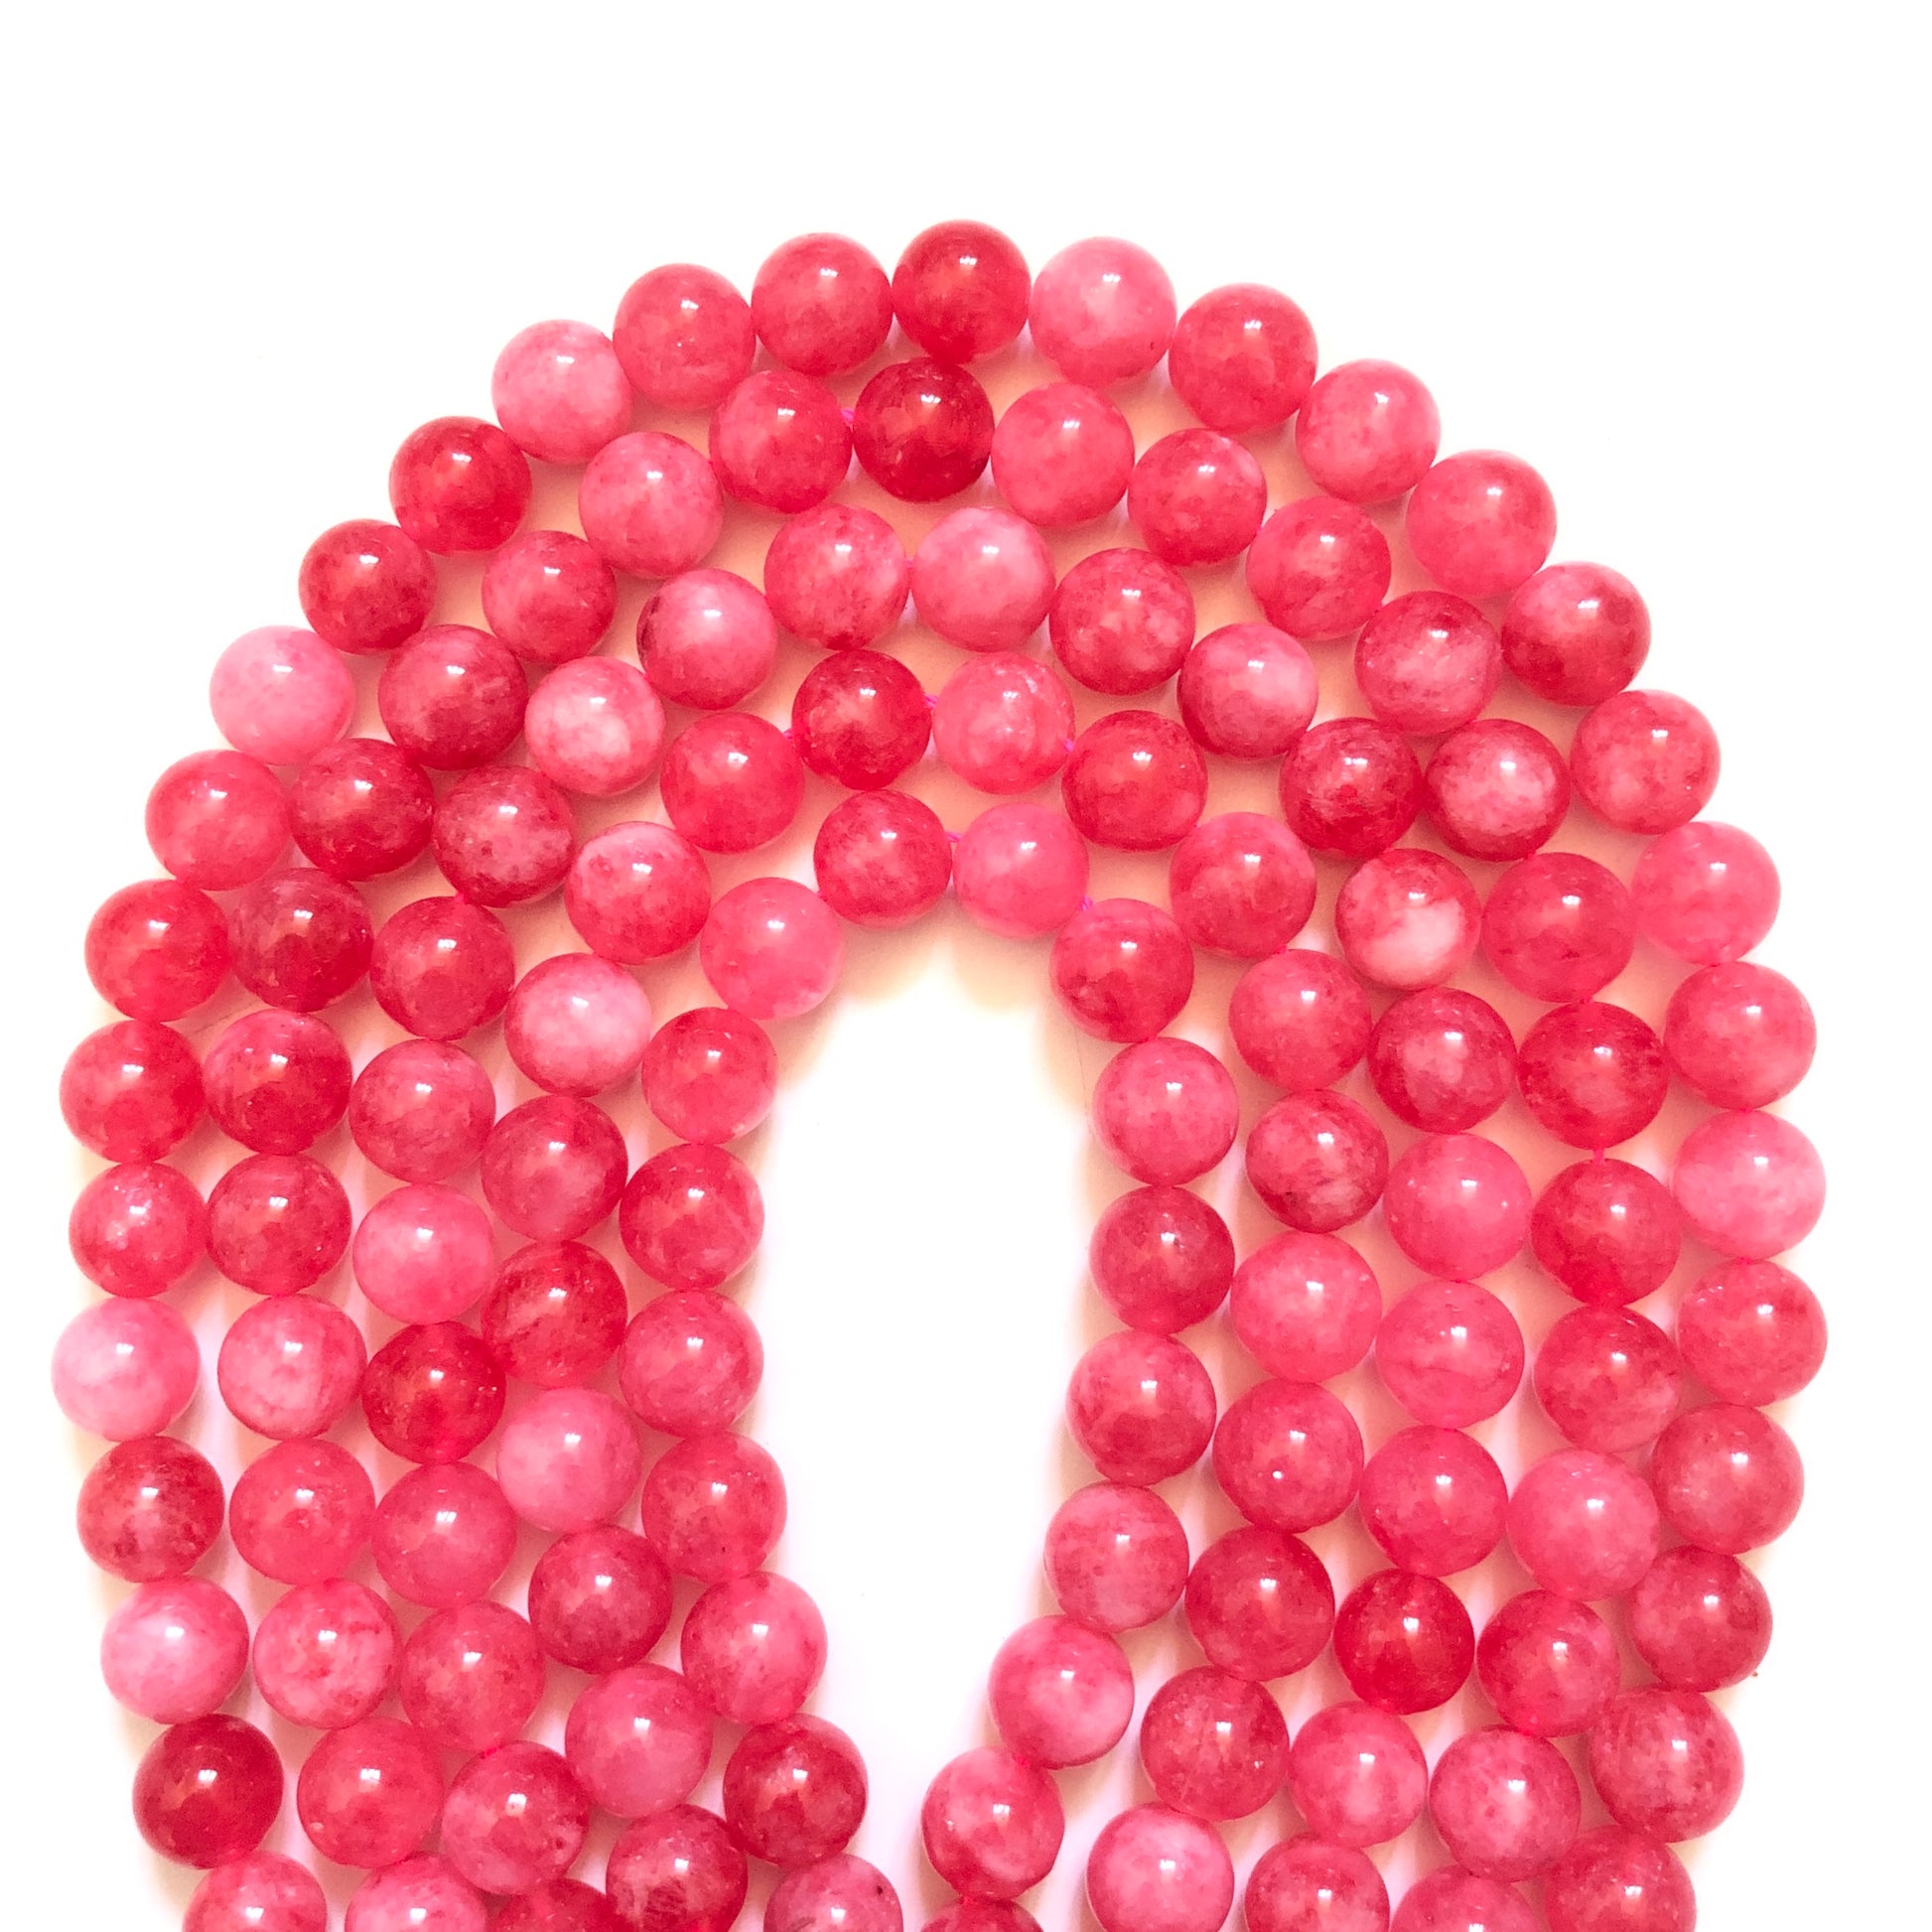 2 Strands/lot 10mm Multicolor Quartz Round Stone Beads Red Rhodochrosite Stone Beads New Beads Arrivals Other Stone Beads Charms Beads Beyond